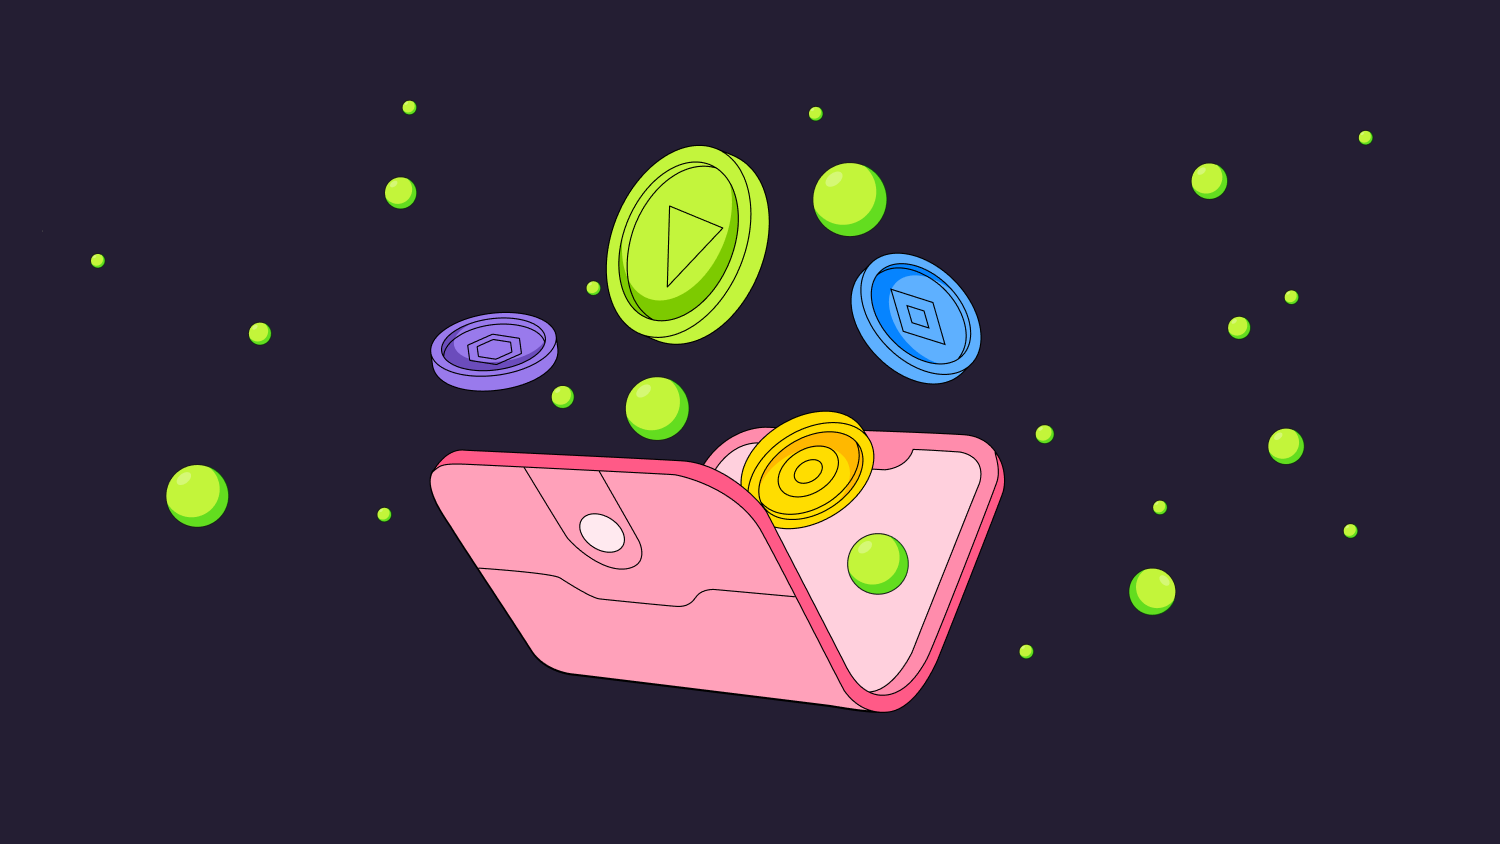 When wallets? We have news! We’re excited to share that starting next month, the first customers will begin testing crypto wallets on Robinhood. We